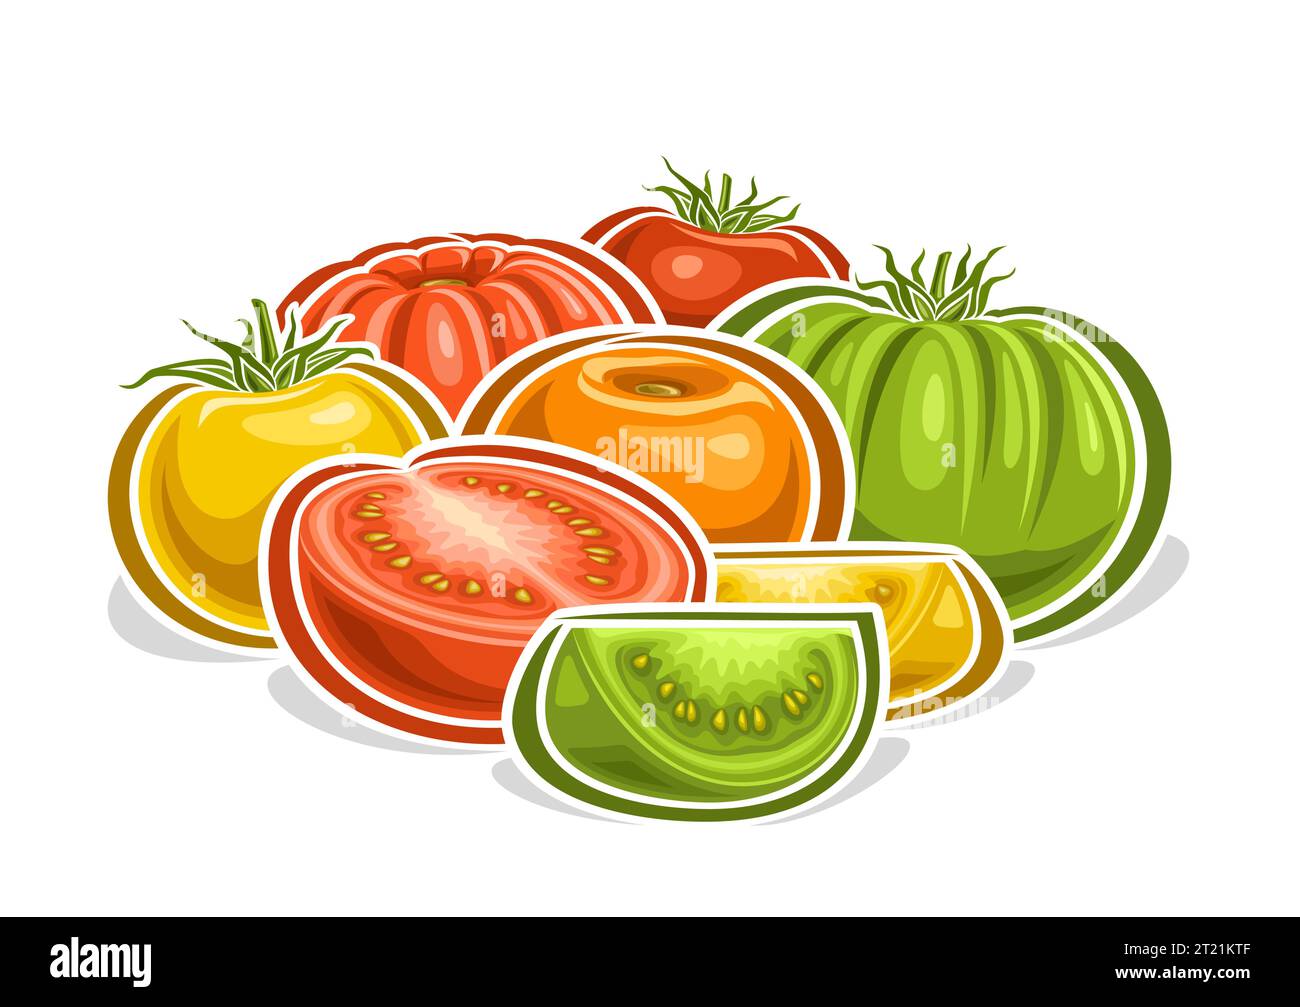 Vector logo for Tomatoes, decorative horizontal poster with outline illustration of colorful tomato composition with leaves, cartoon design veggie pri Stock Vector